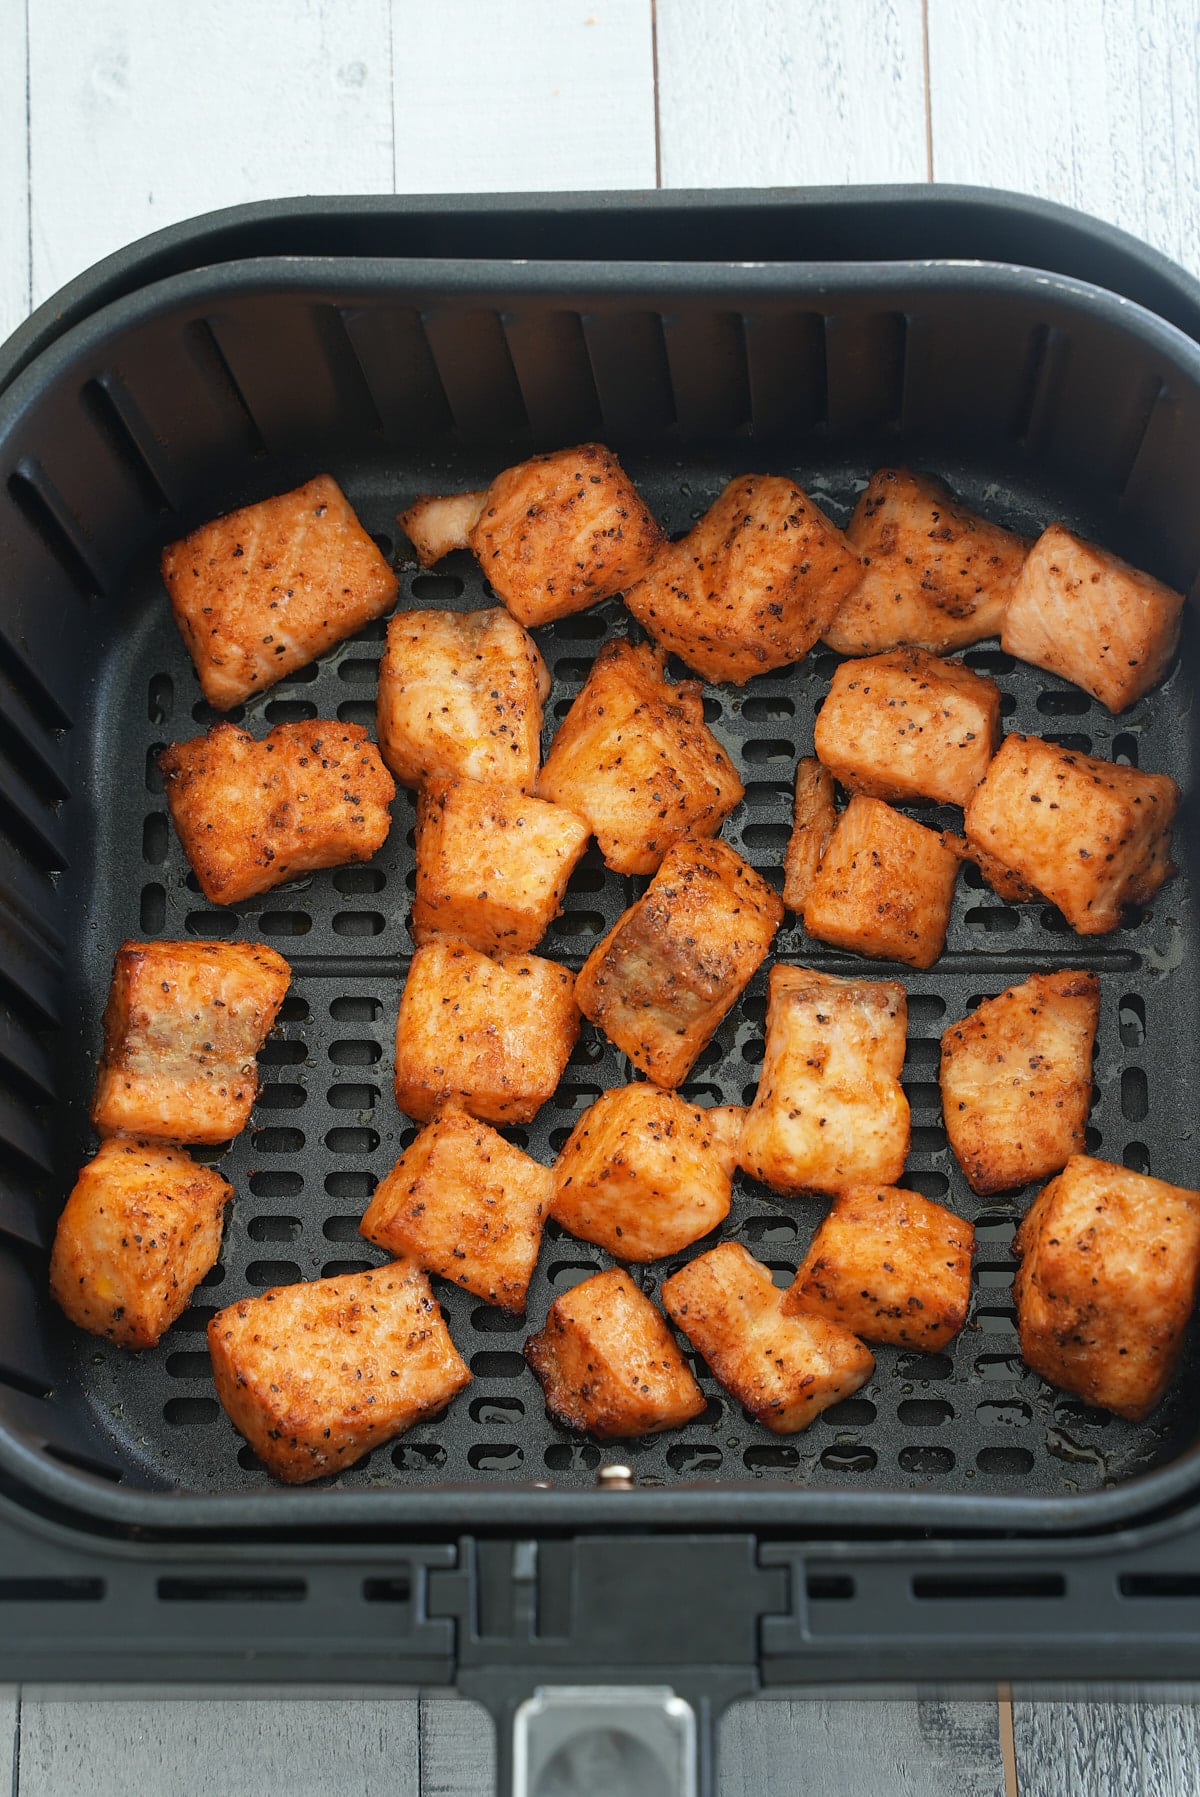 Air fryer basket filled with cubes of cooked salmon seasoned in dry salmon rub.